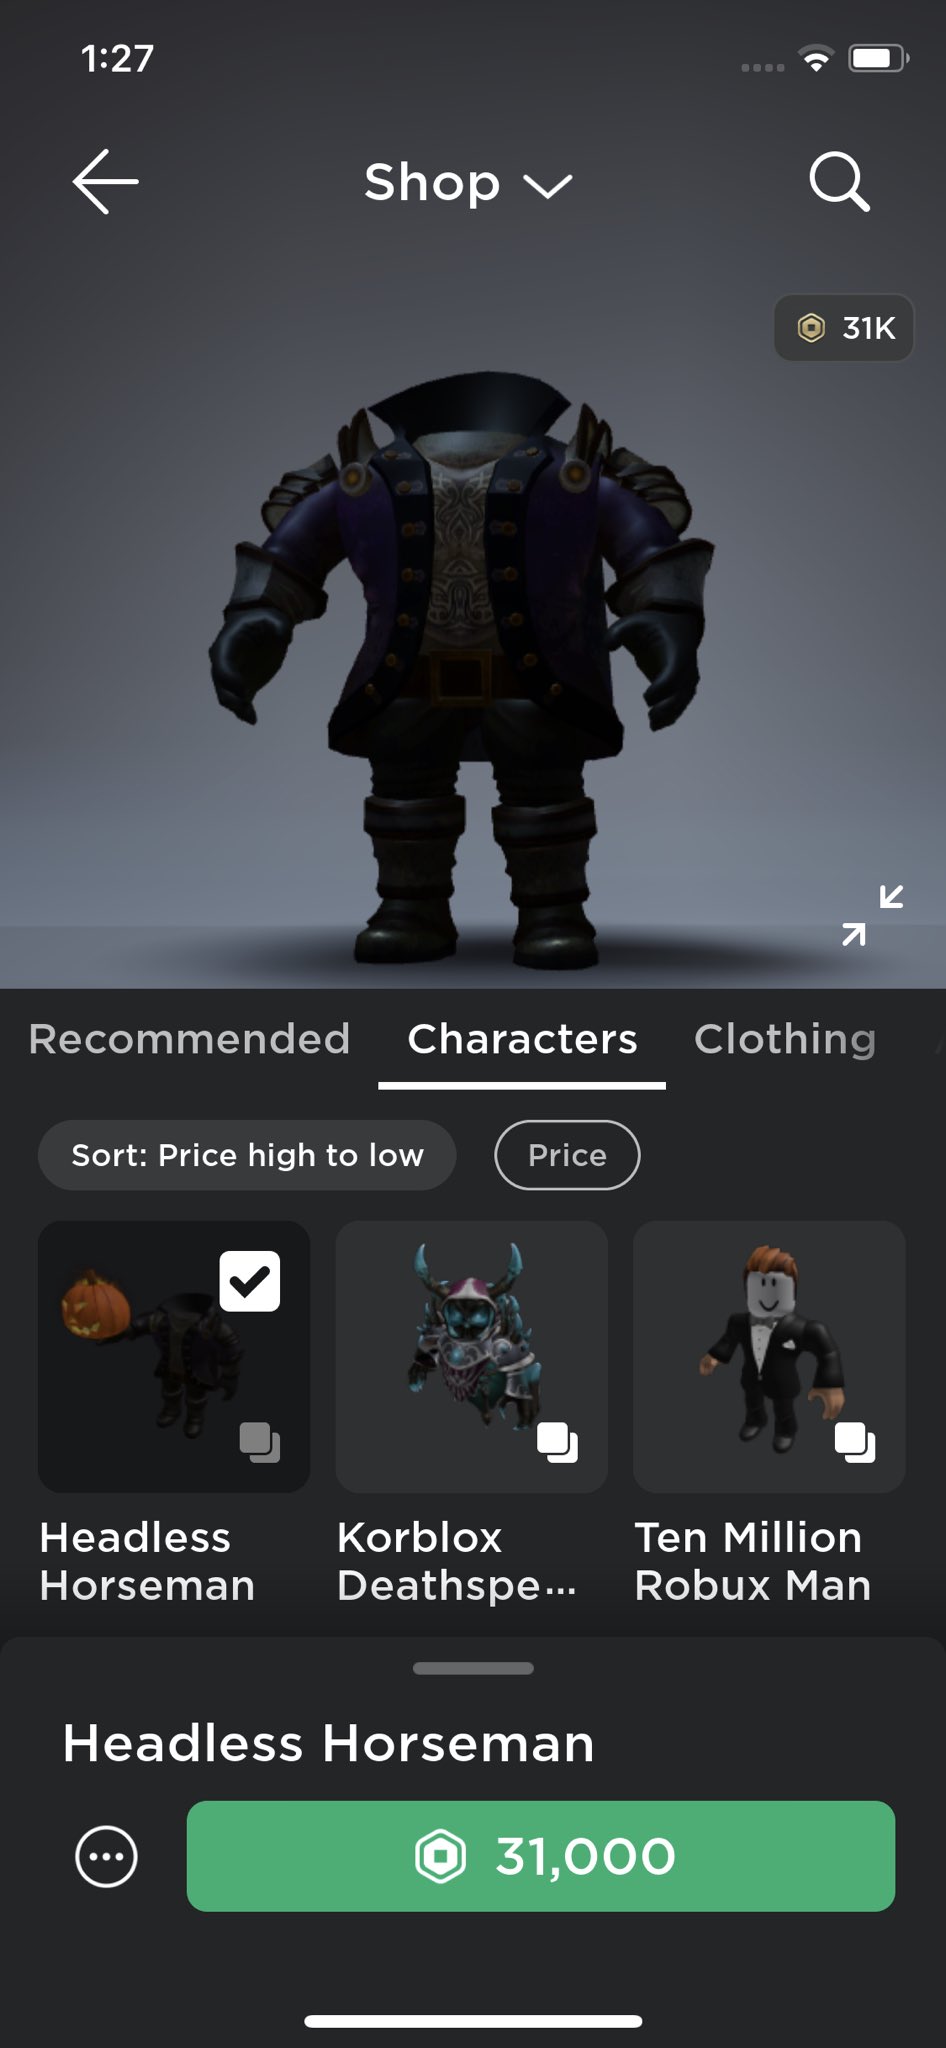 Daily Headless 🎃 on X: 🎃 DID ANYONE SAY HEADLESS? I'll gift headless to  the first 3,000 users who LIKE & RETWEET this post! 🧡 Once done, link  your gamepass below, and